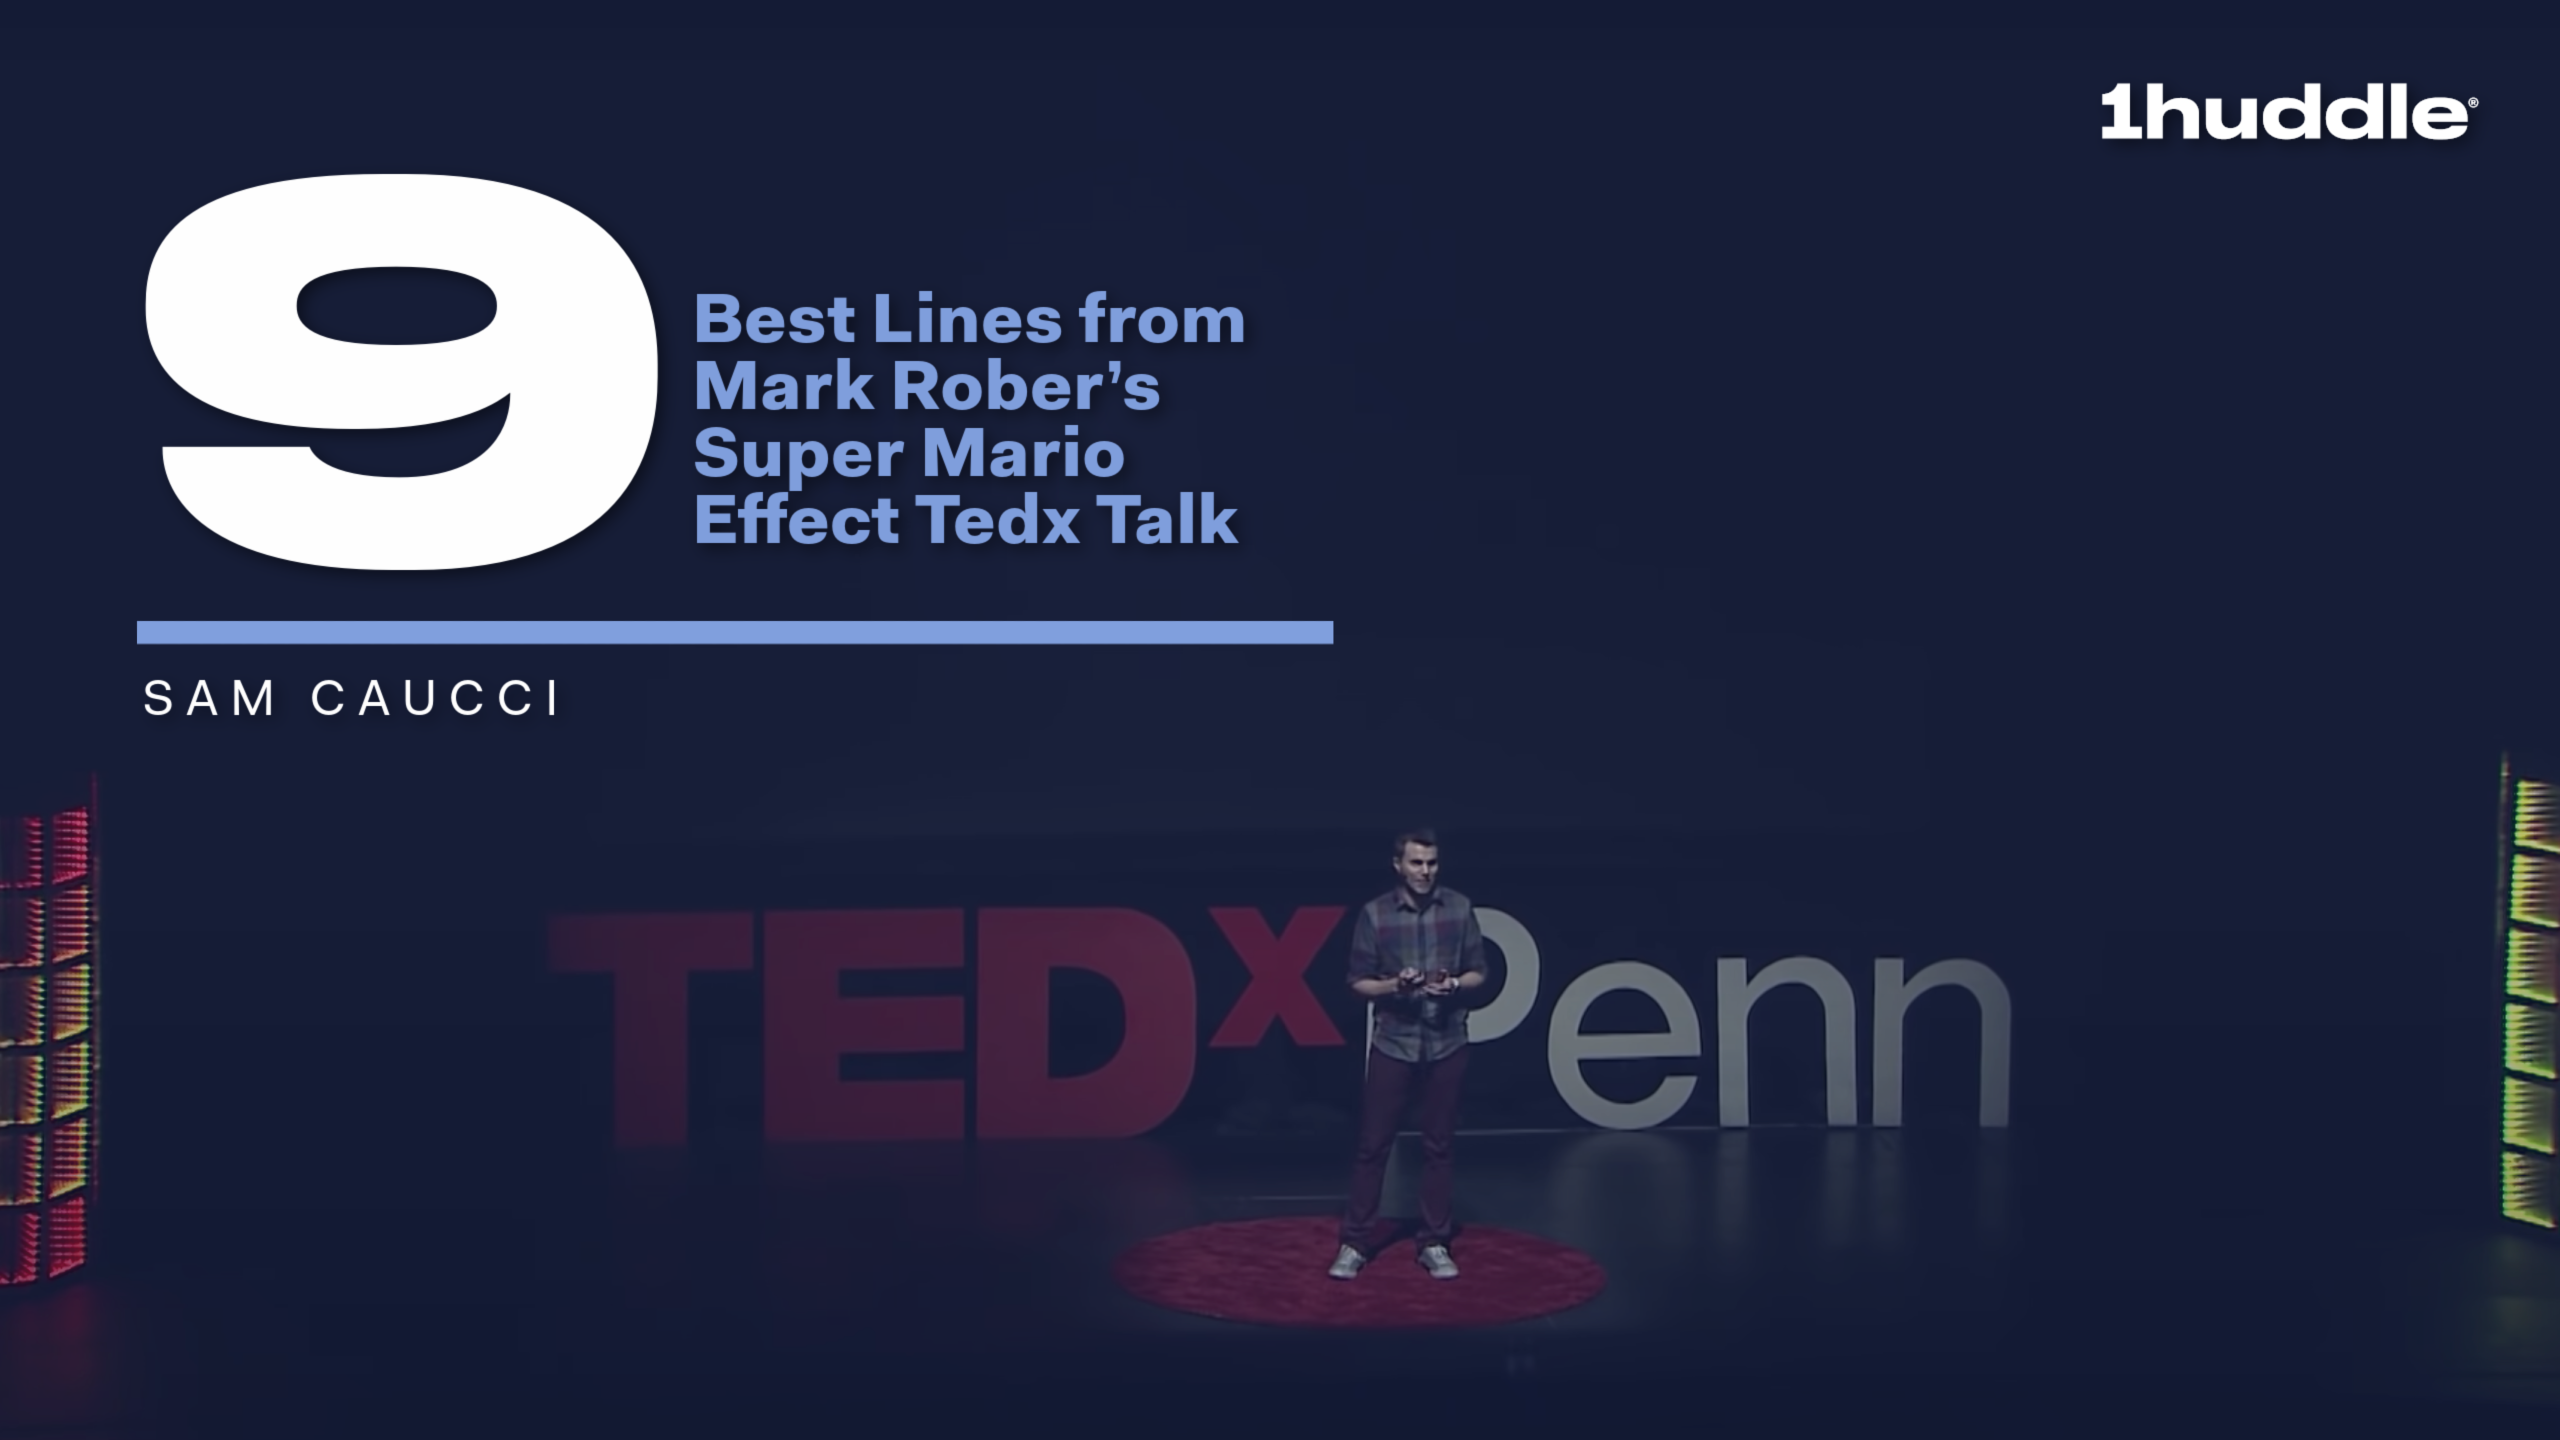 9 Best Lines from Mark Rober’s Super Mario Effect Tedx Talk